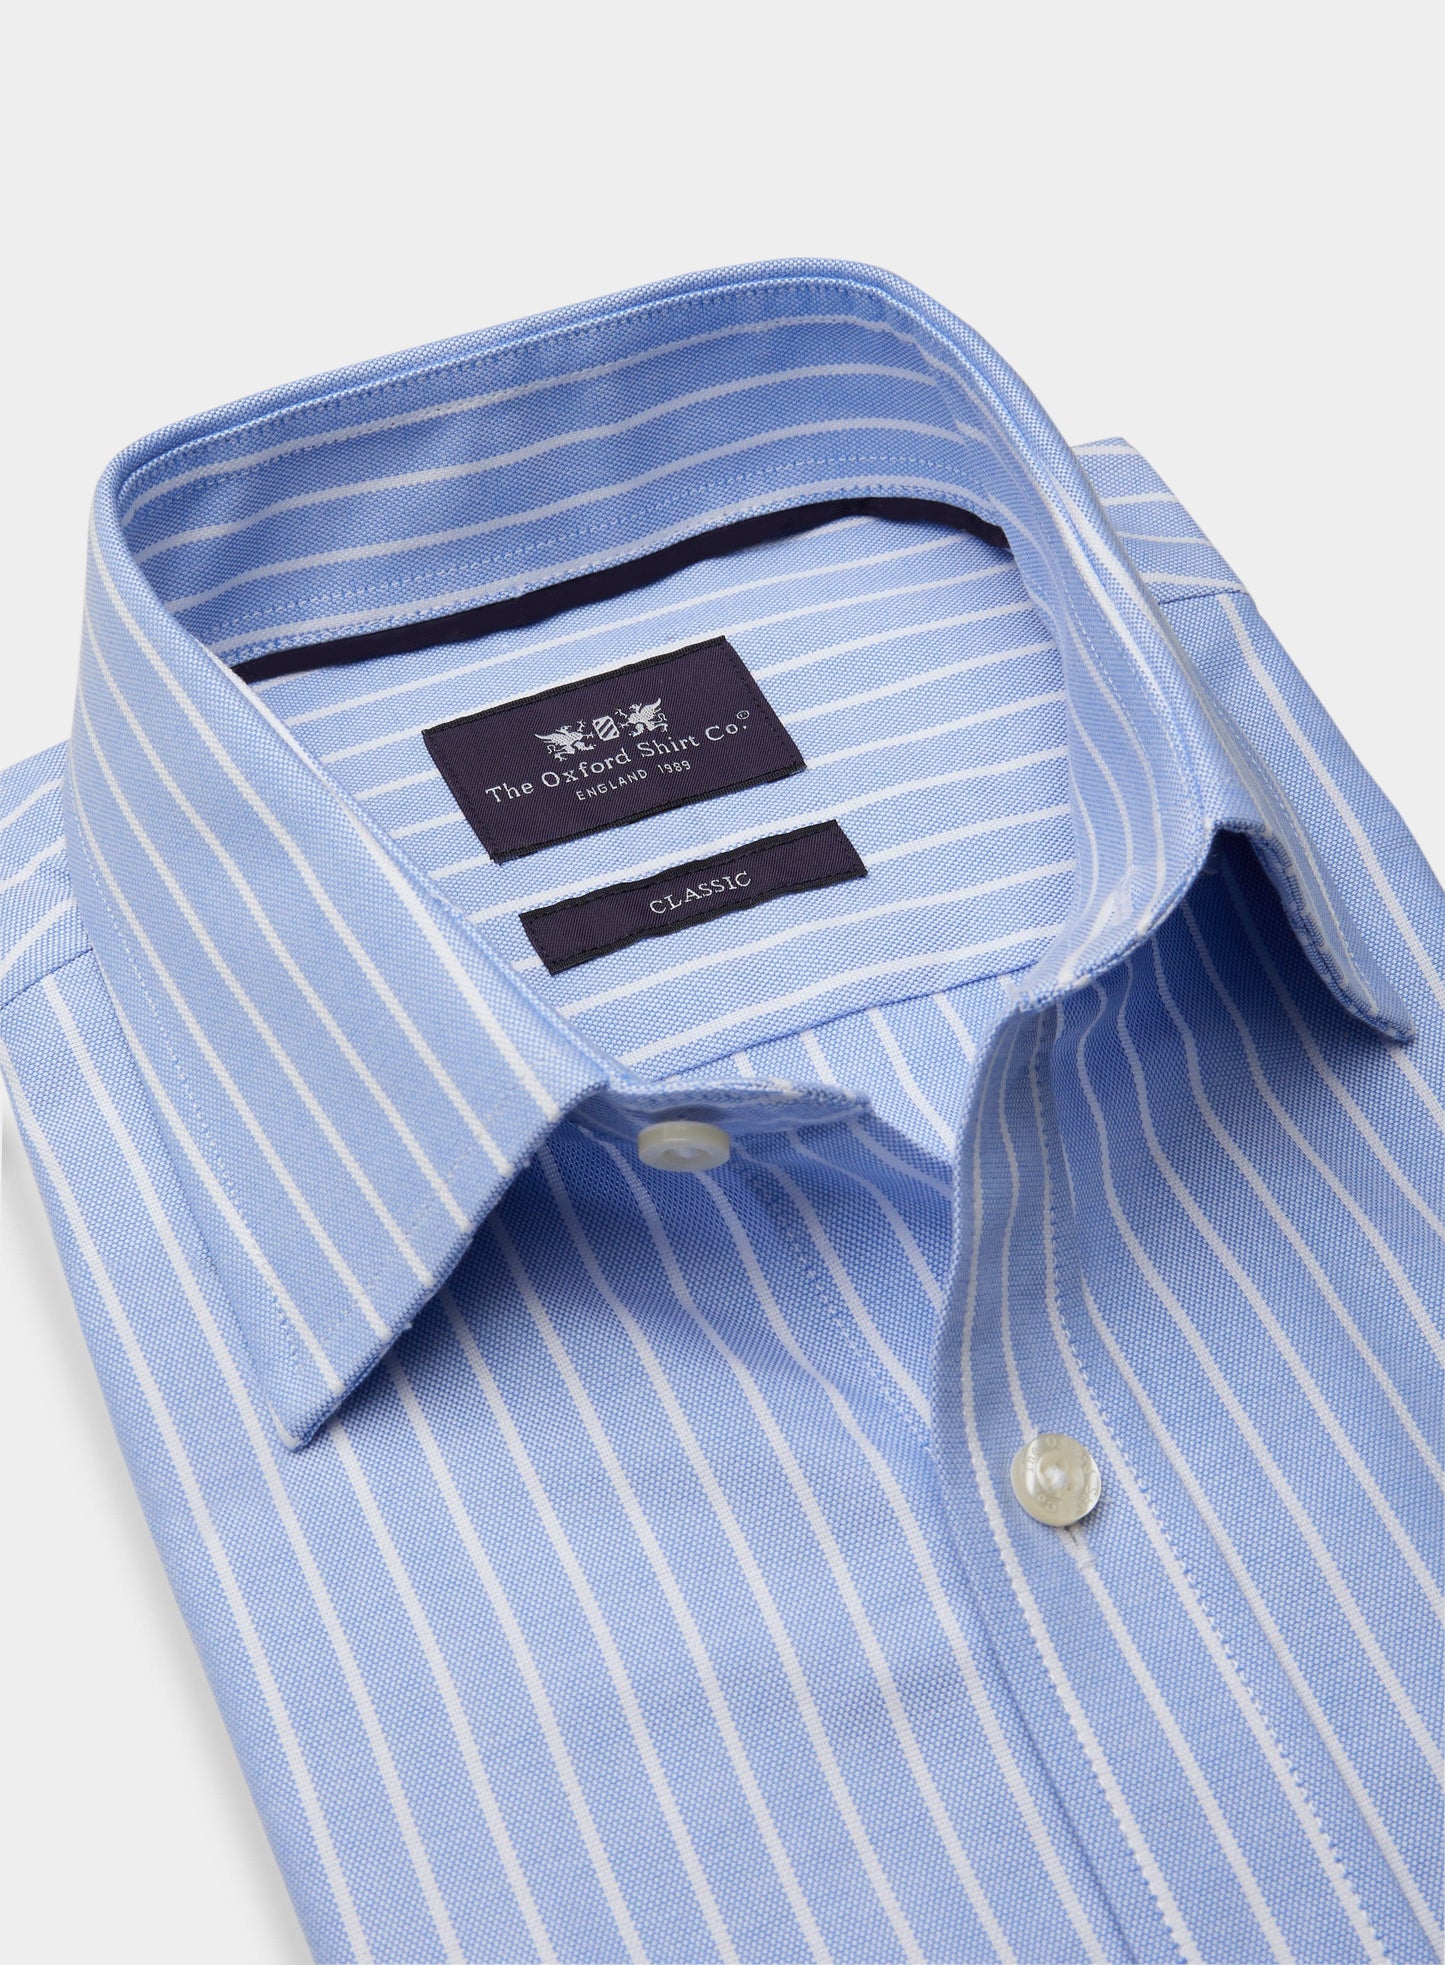 Classic Shirt in Blue and White Stripe